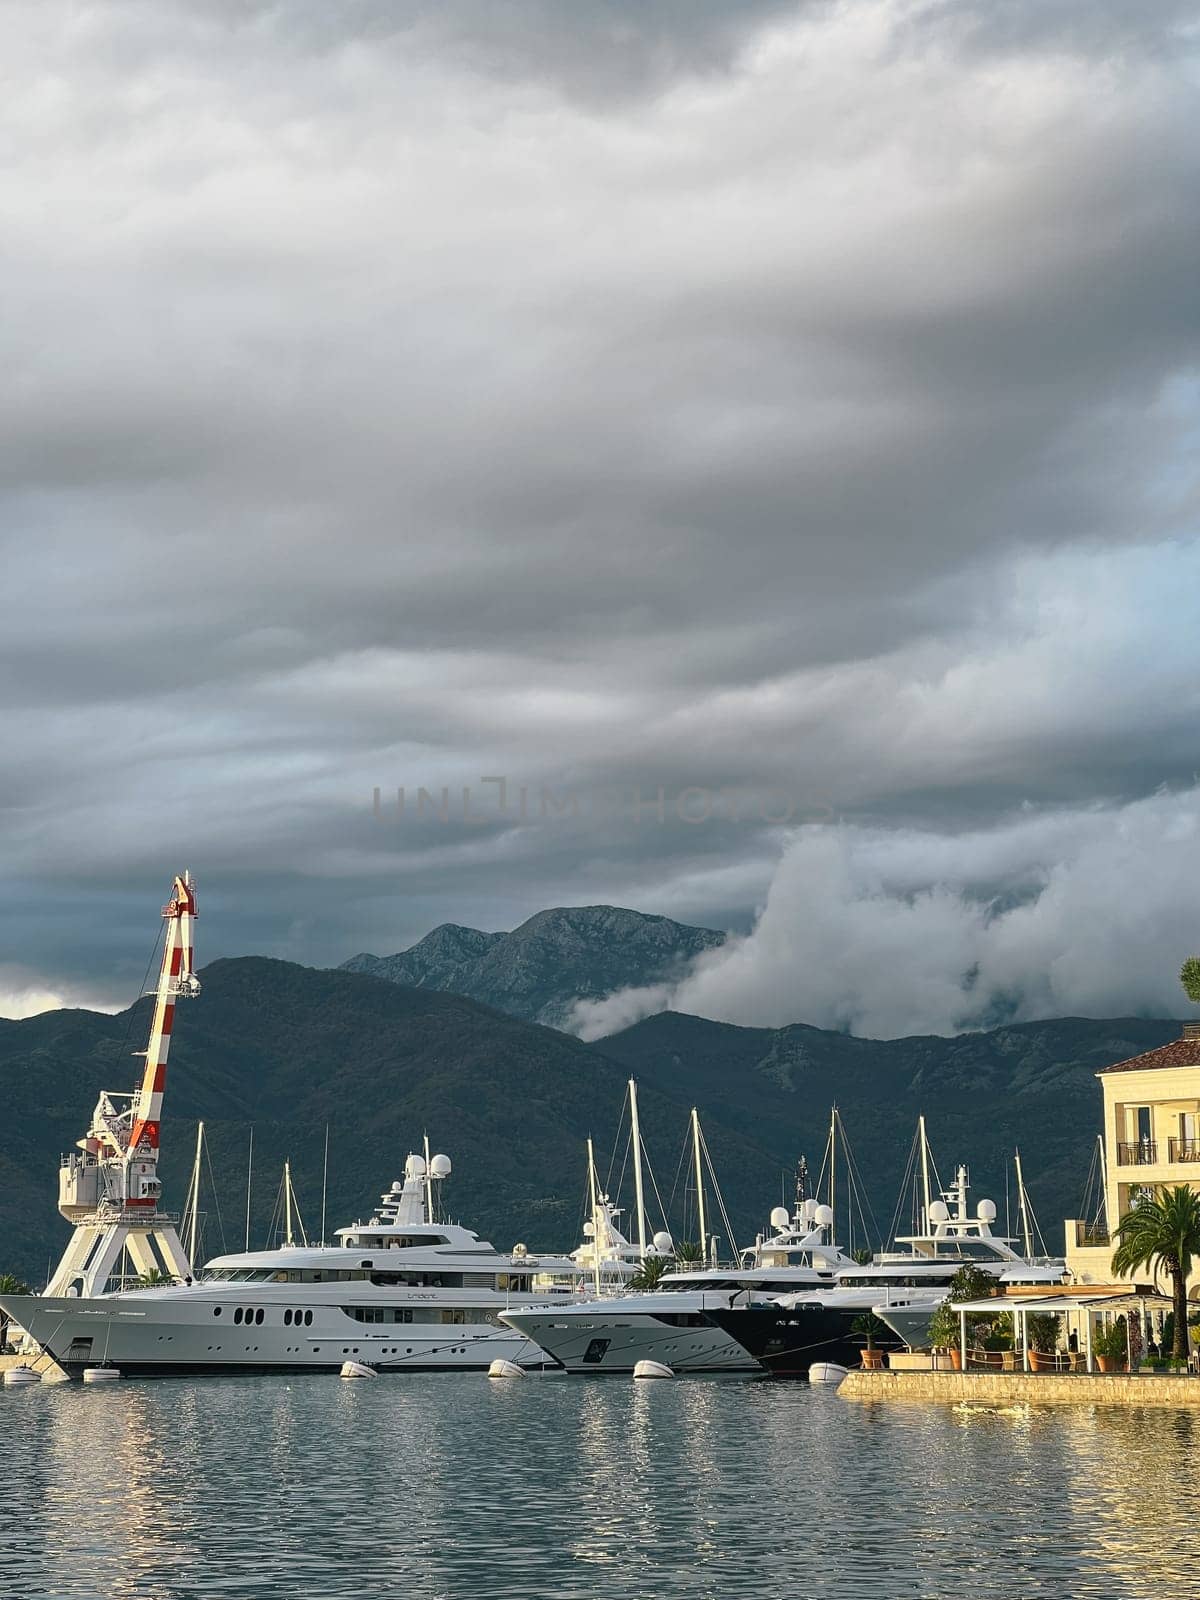 Yachts stand at the mooring of the marina against the backdrop of mountains in the fog. High quality photo